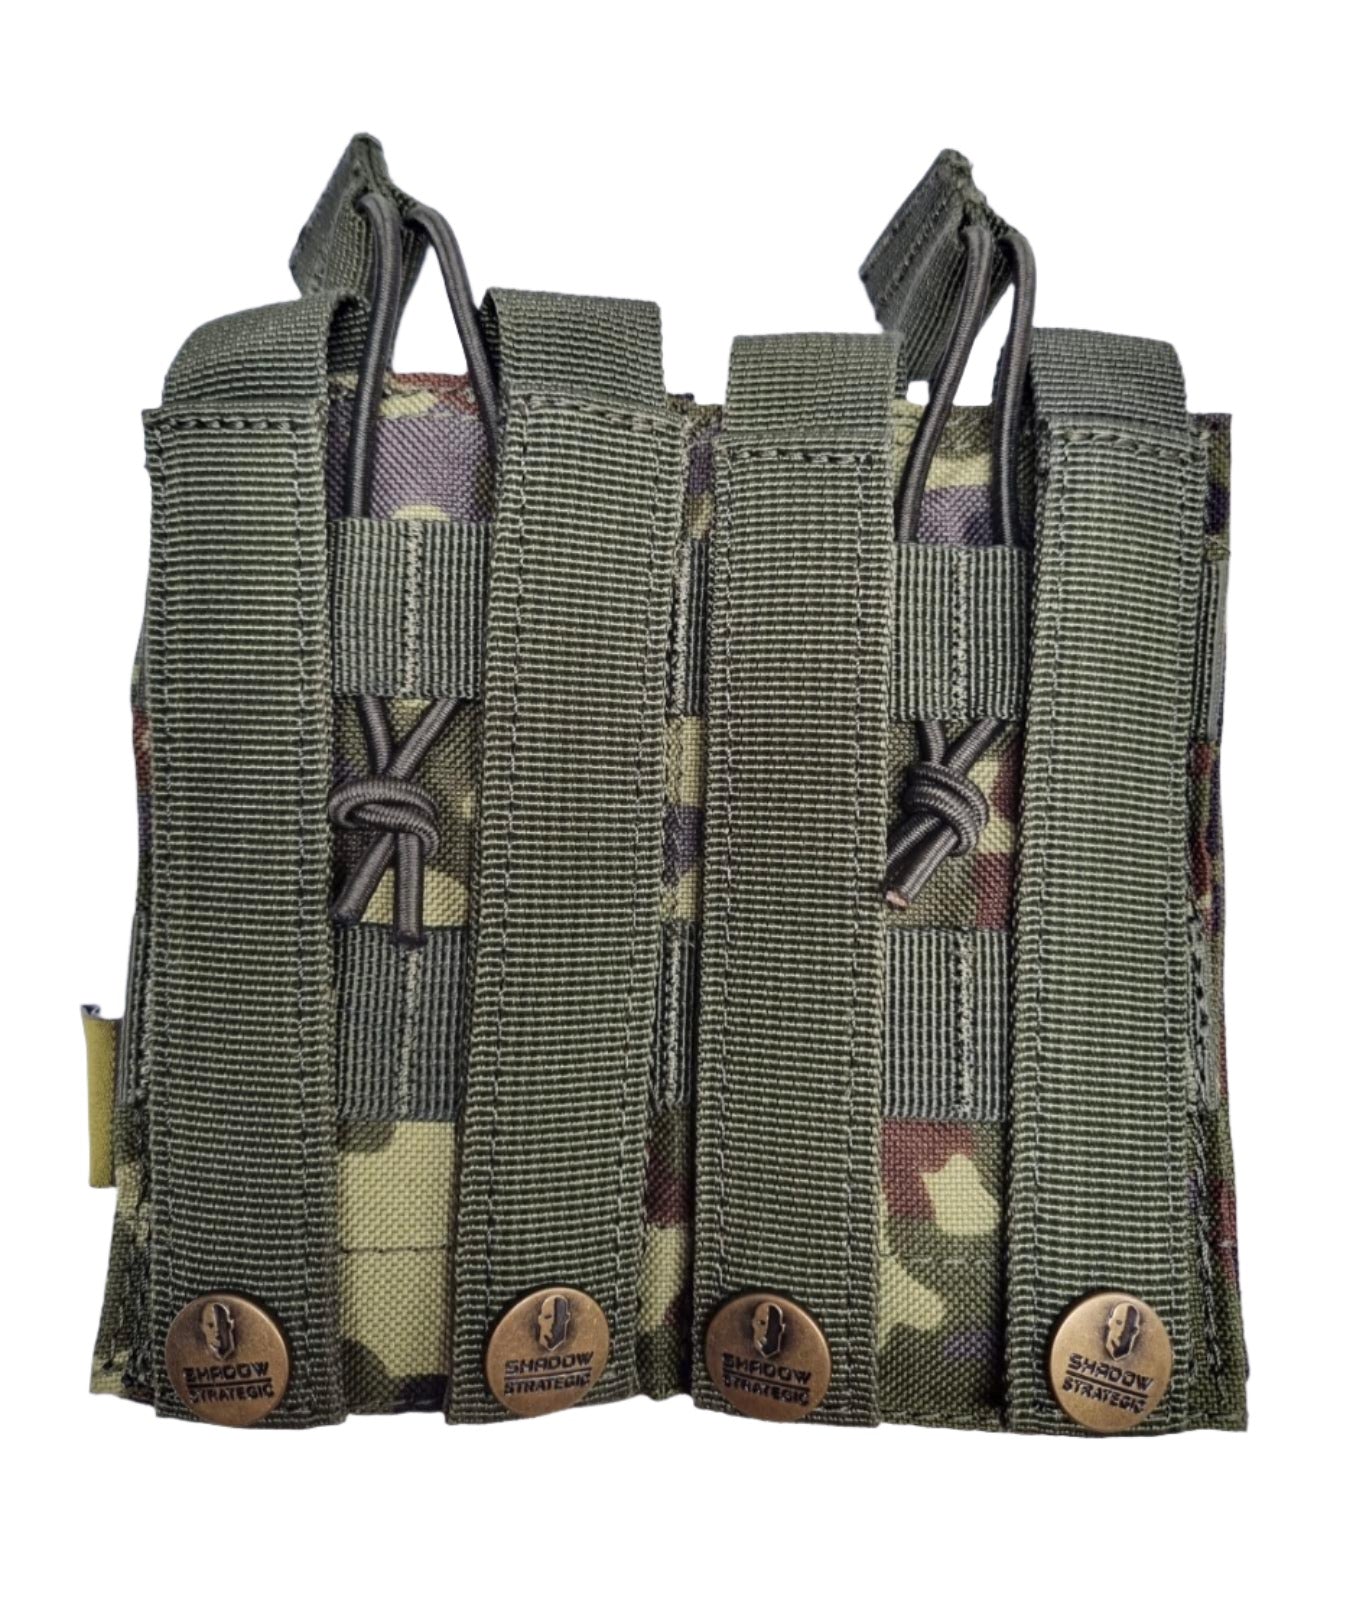 SHS - 996 STACKER OPEN-TOP MAG POUCH DOUBLE COLOUR GERMAN FLECTARN